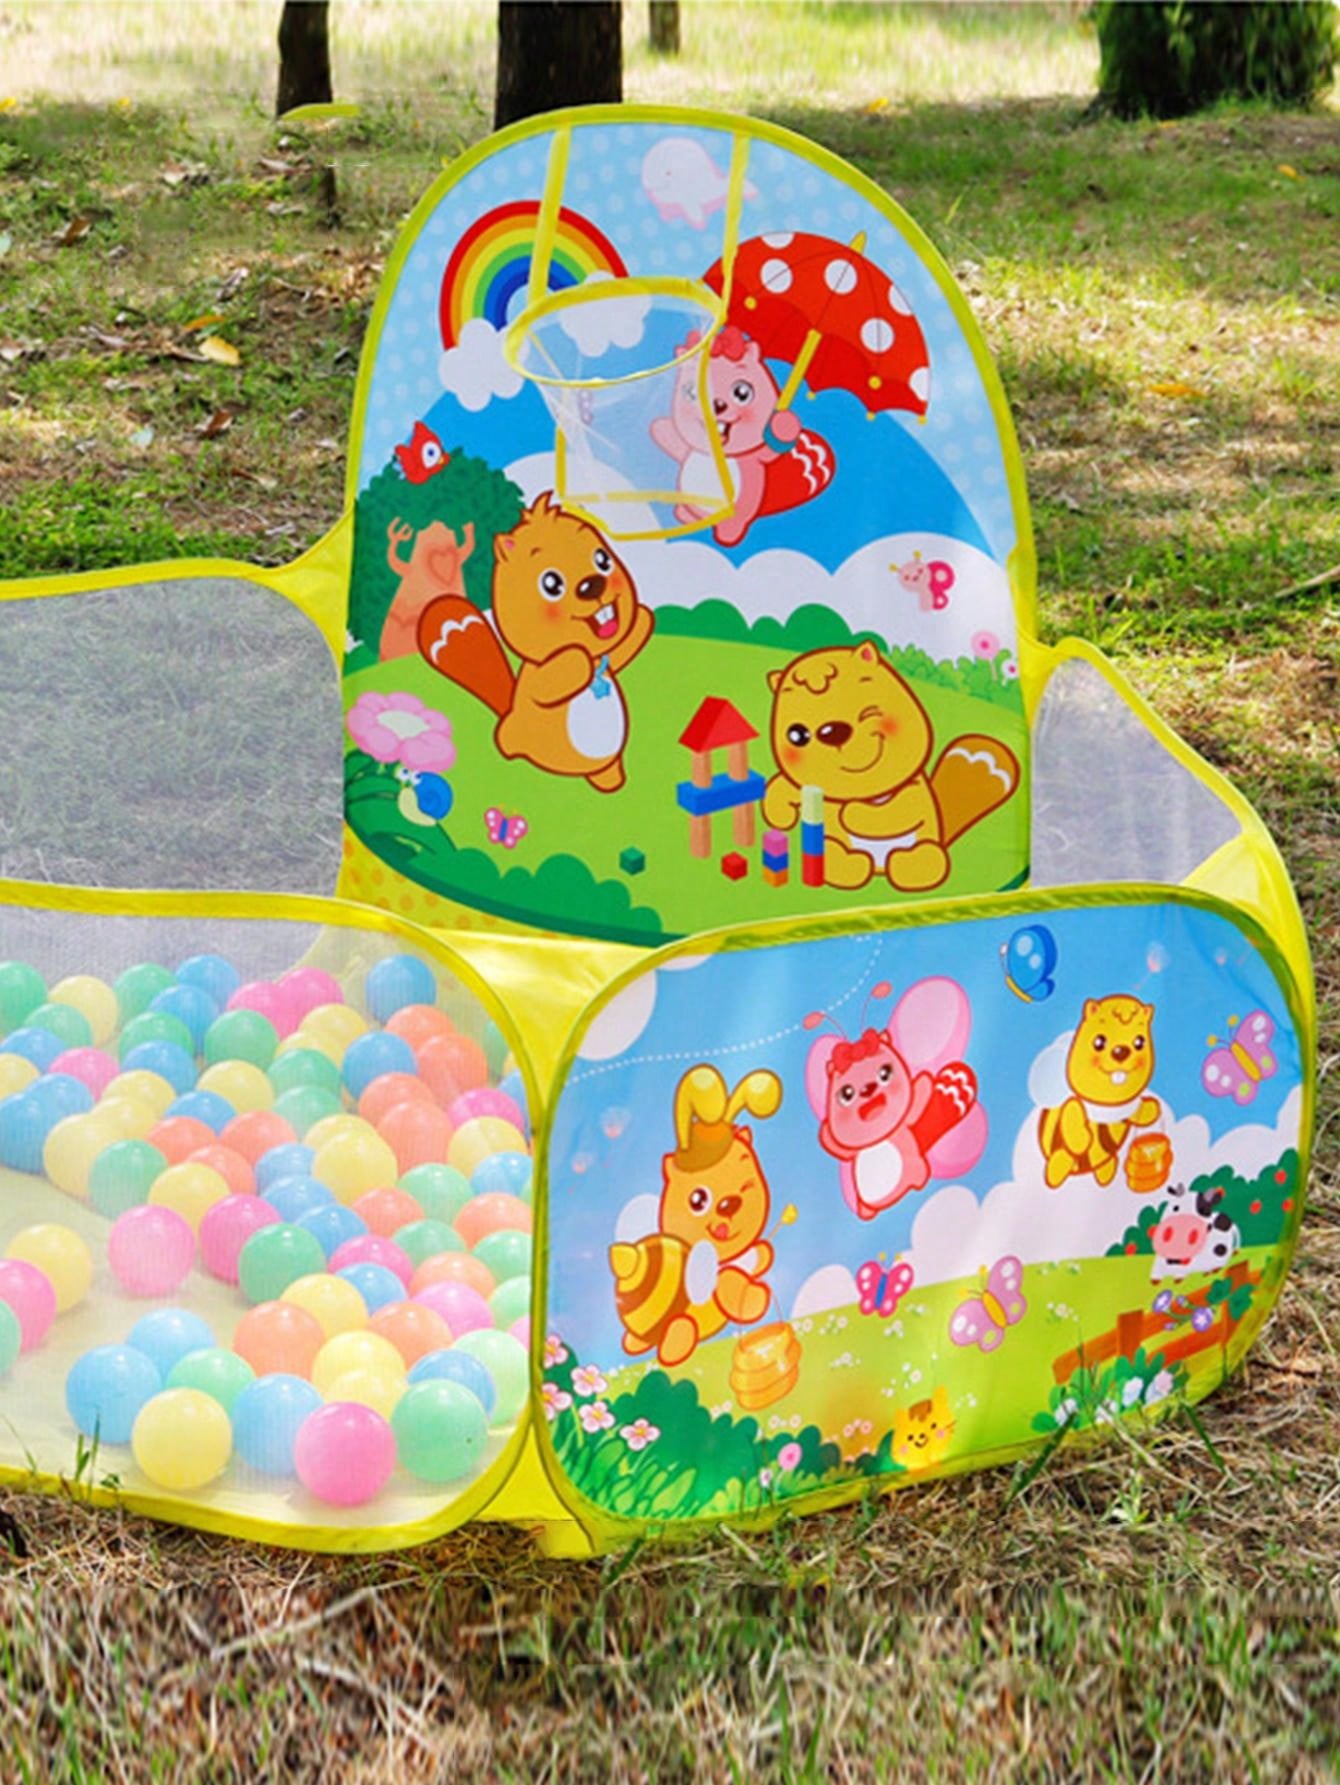 47" Cartoon Ball Pit Kids Toy, Children Ball Pit, Indoor And Outdoor Easy Folding Ball Play Pool Kids Toy Play Tent With Carry Tote, Kids Ball Pit Large Pop Up Childrens Ball Pits Tent For Toddlers Playhouse Baby Crawl Playpen With Basketball Hoop And Zi